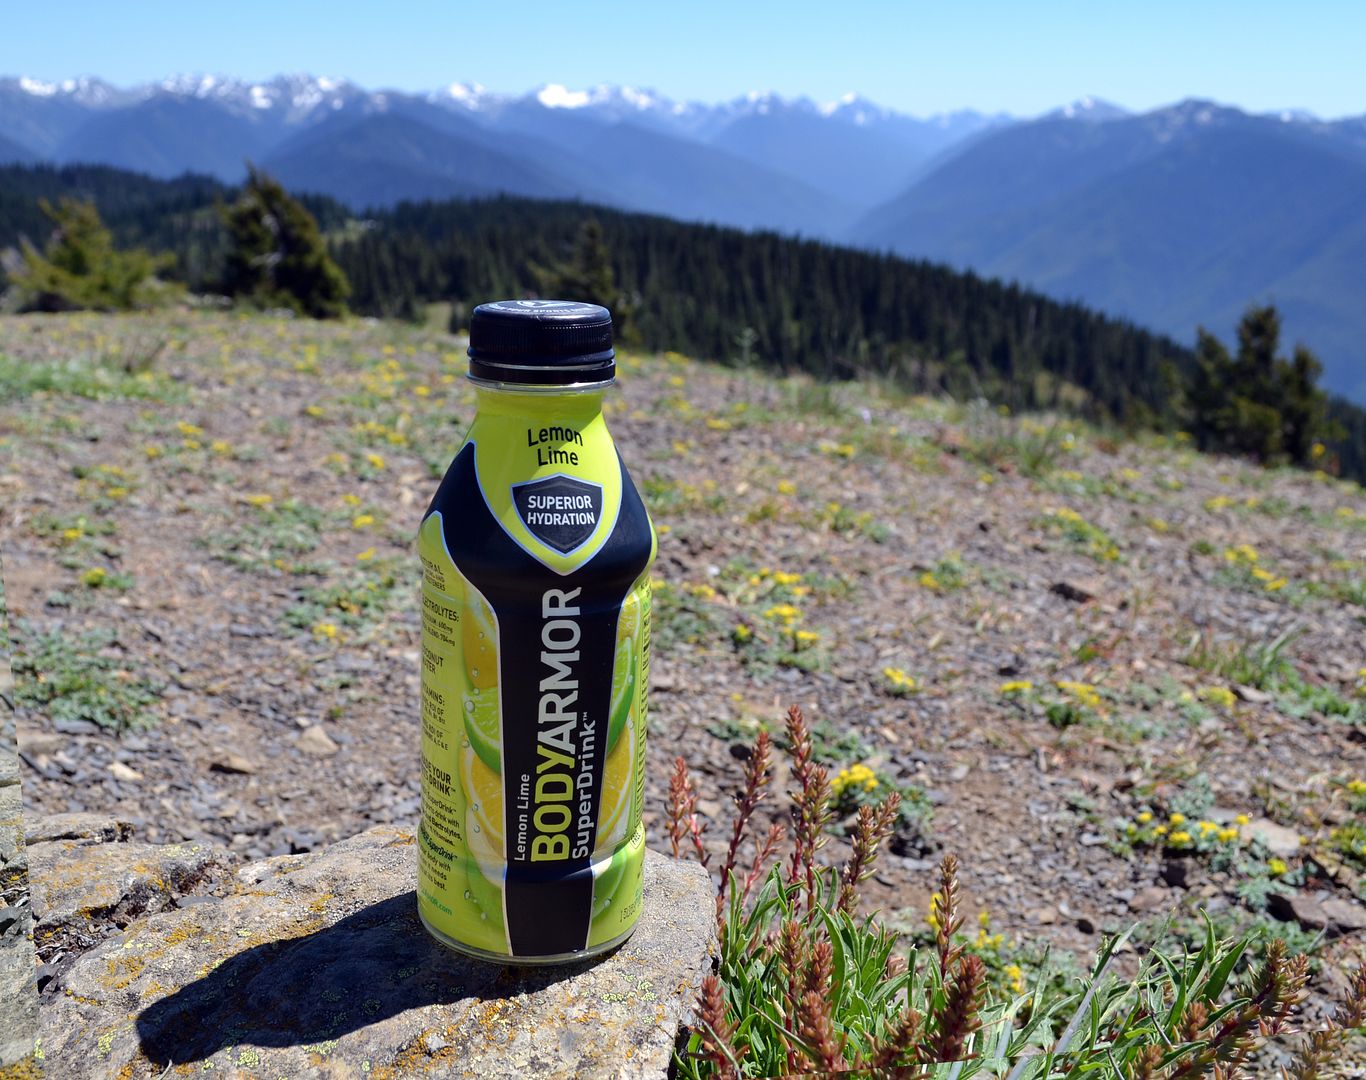 How to keep kids hydrated: Serve BODYARMOR natural sports drink in Lemon Lime | Cool Mom Eats